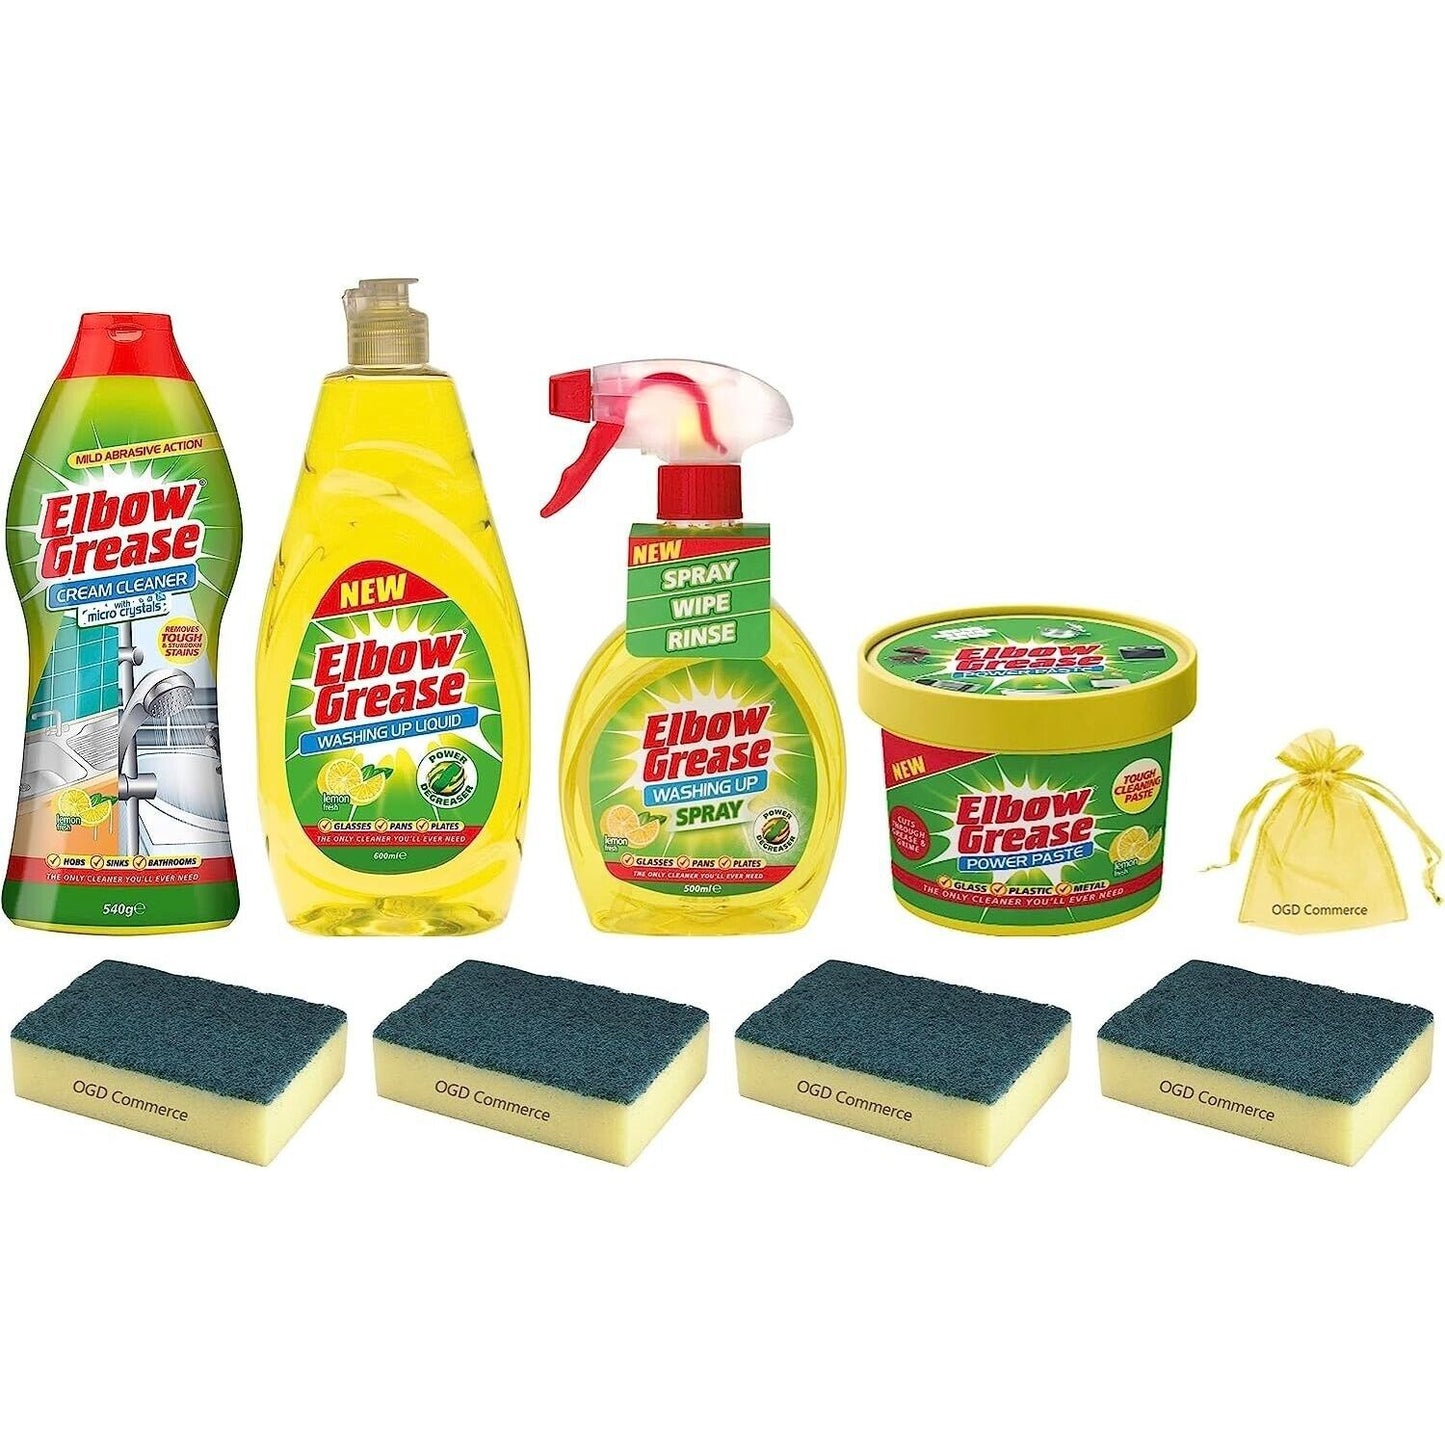 Elbow Grease New Bundle Pack for Your Home